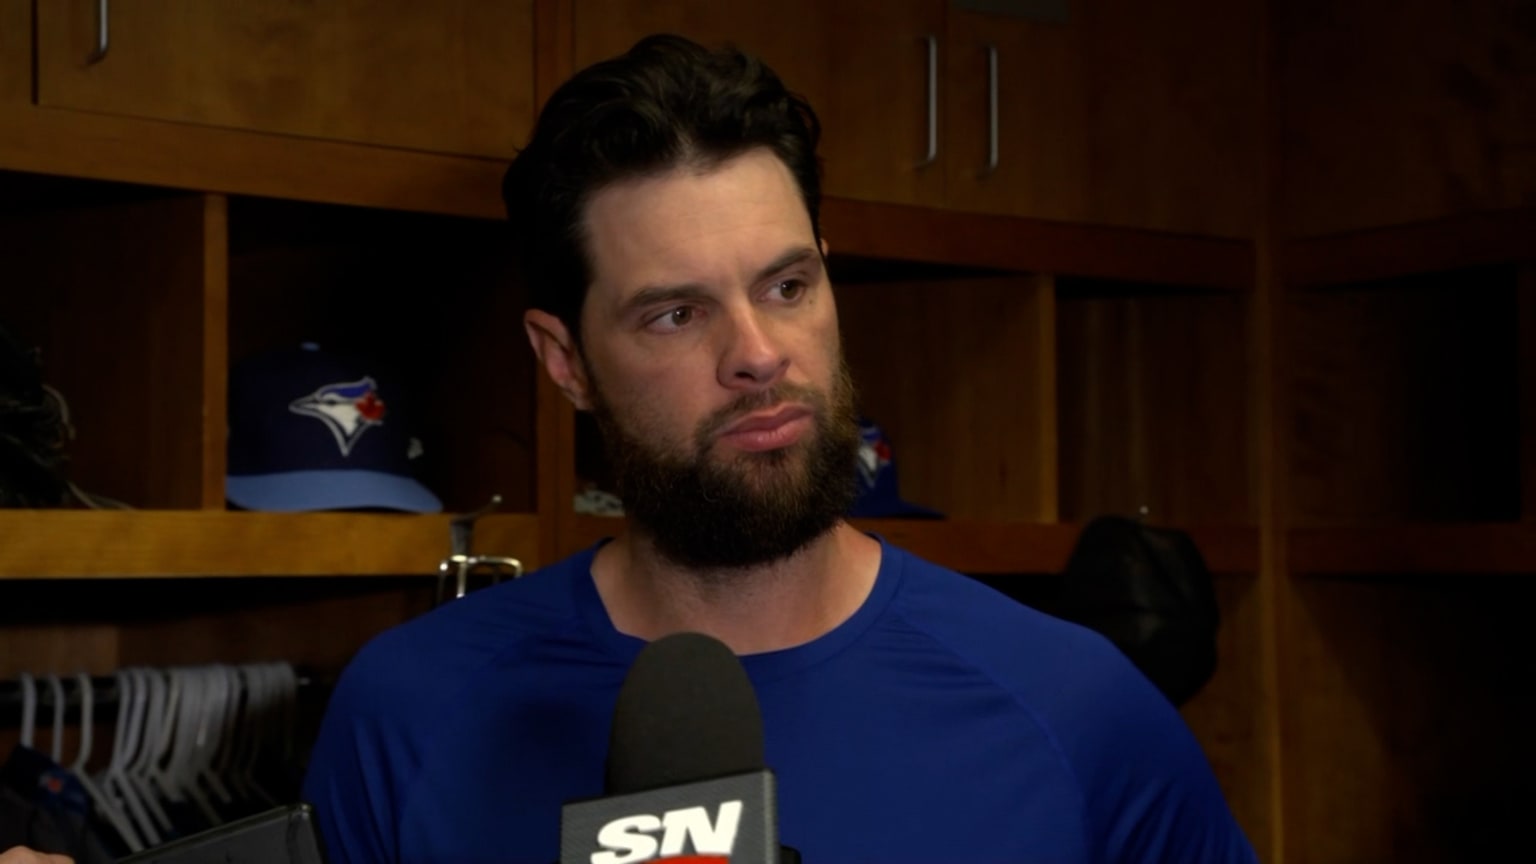 Brandon Belt hopes to bounce back with the Blue Jays - The Athletic